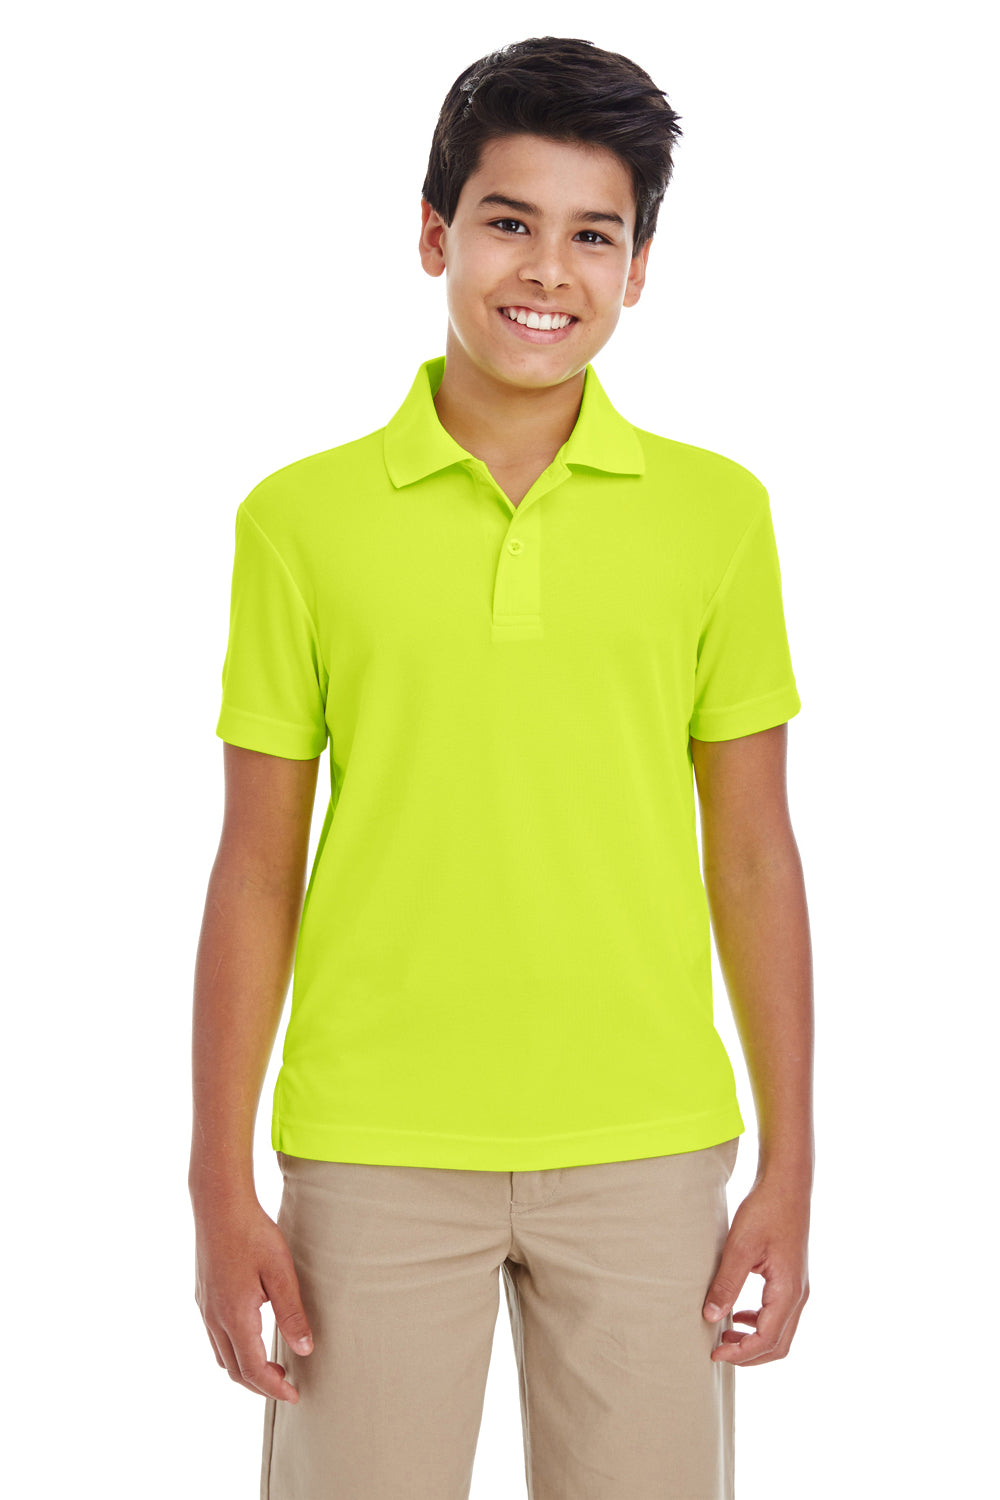 Core 365 88181Y Youth Origin Performance Moisture Wicking Short Sleeve Polo Shirt Safety Yellow Front